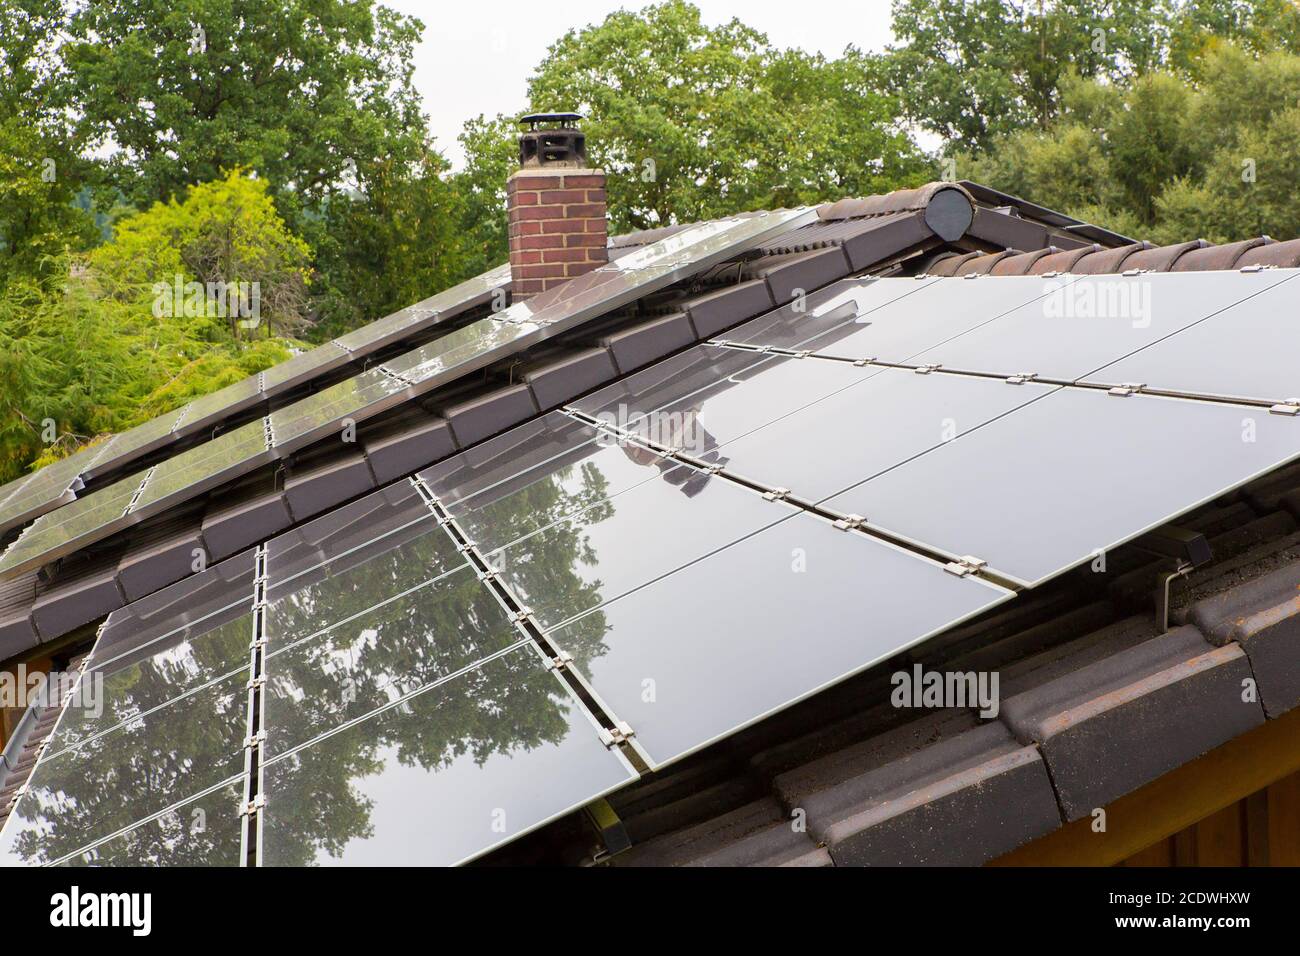 Roof surface of house with black solar panels Stock Photo